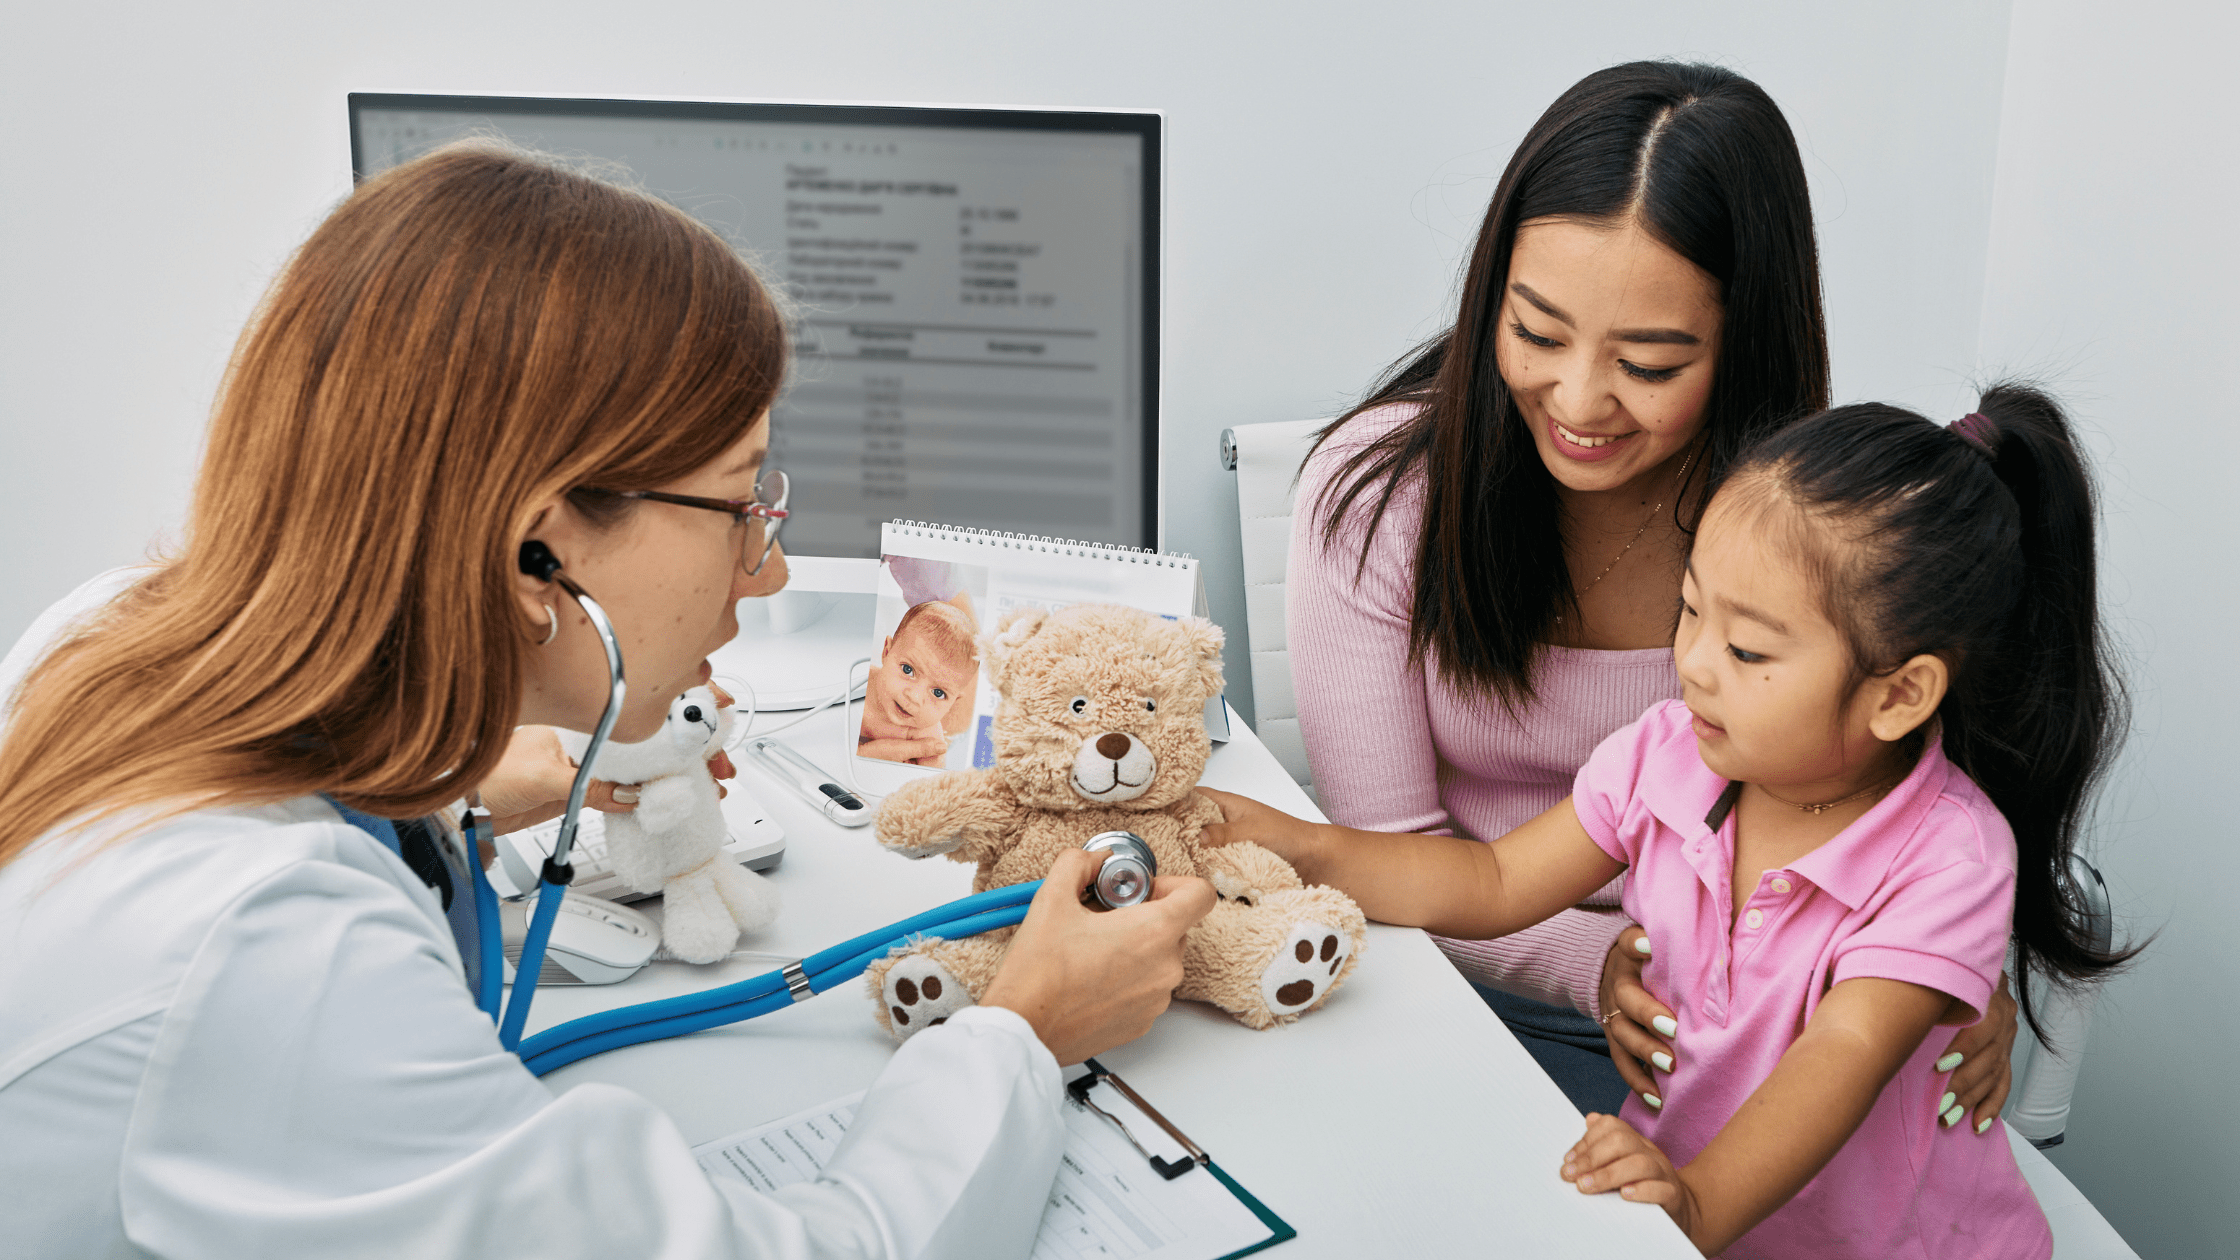 Female doctor using a stethoscope on a teddy bear to engage a young girl and her mother during a pediatric check-up in a medical office.